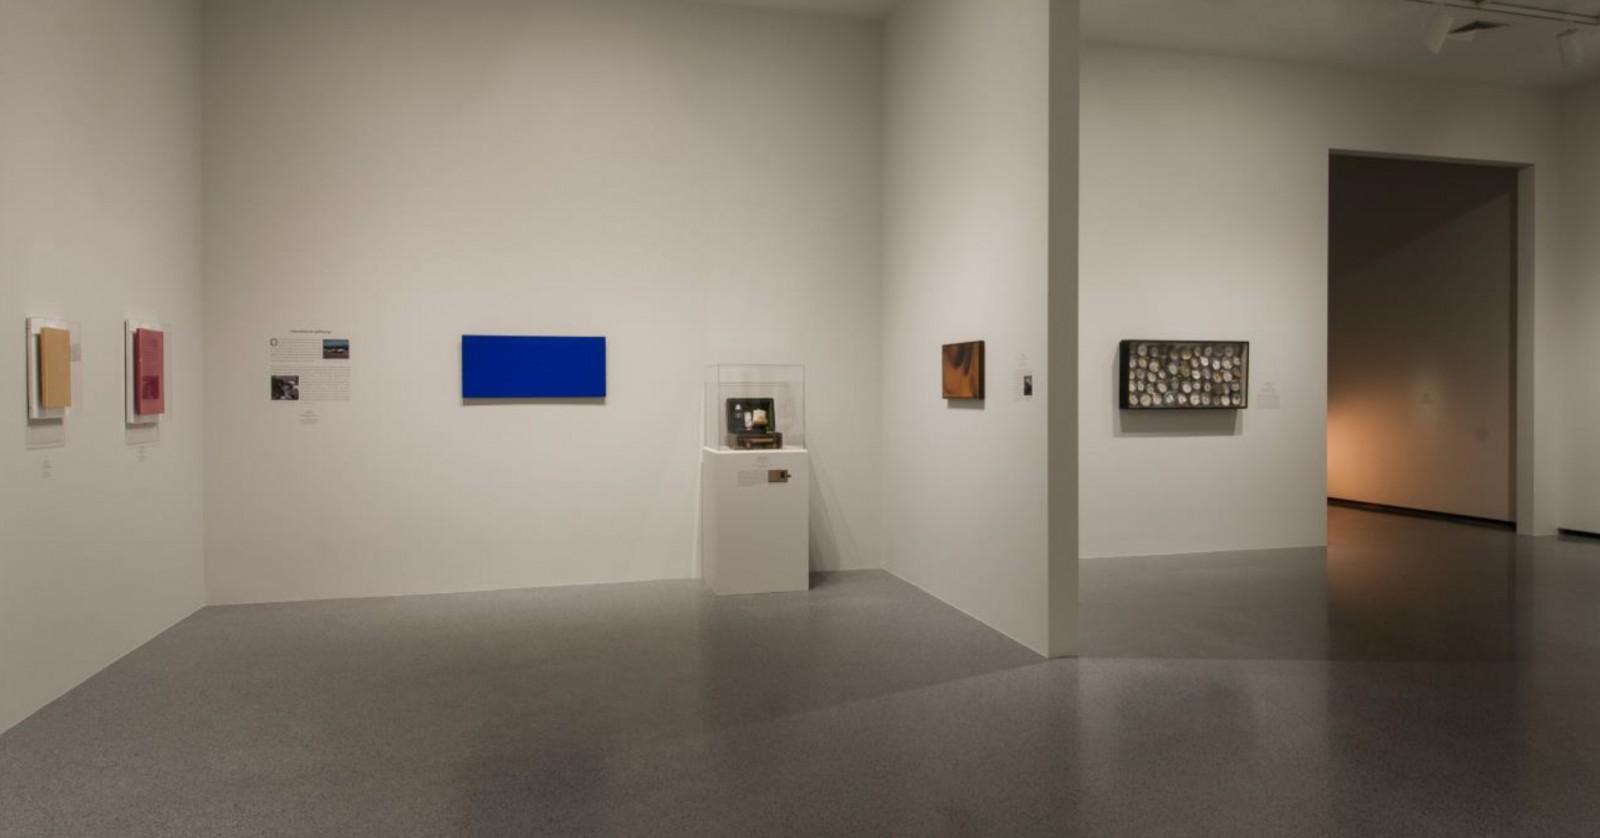 View of the exhibition "From Los Angeles to New York: The Dwan Gallery 1959-1971", National Gallery of Art, 2017 (IKB 186, MG 31, MP 21, F 113)